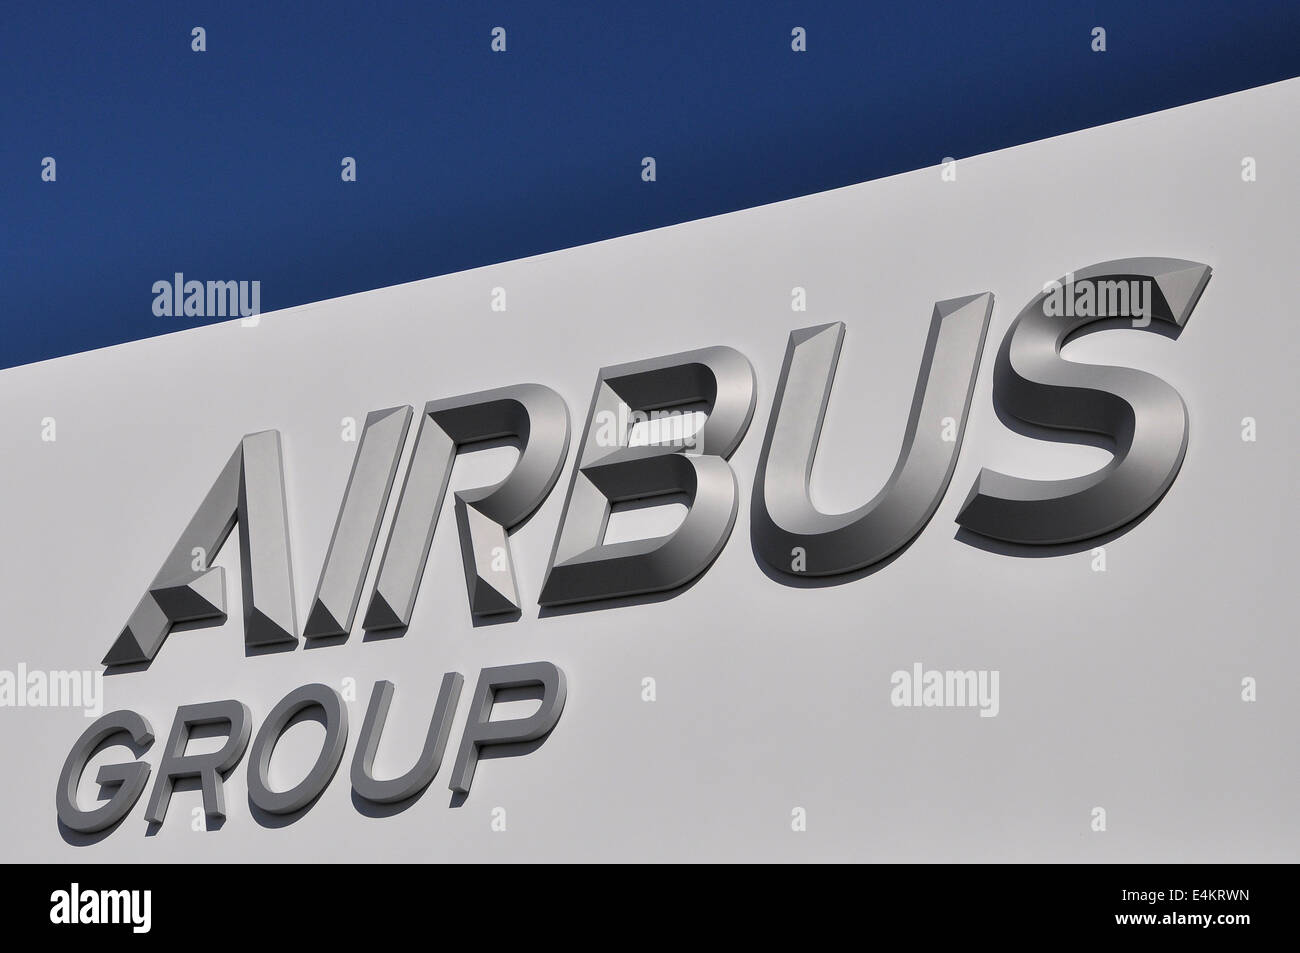 Airbus chalet at Farnborough. Airbus Group raised logo brand titles. Space for copy Stock Photo